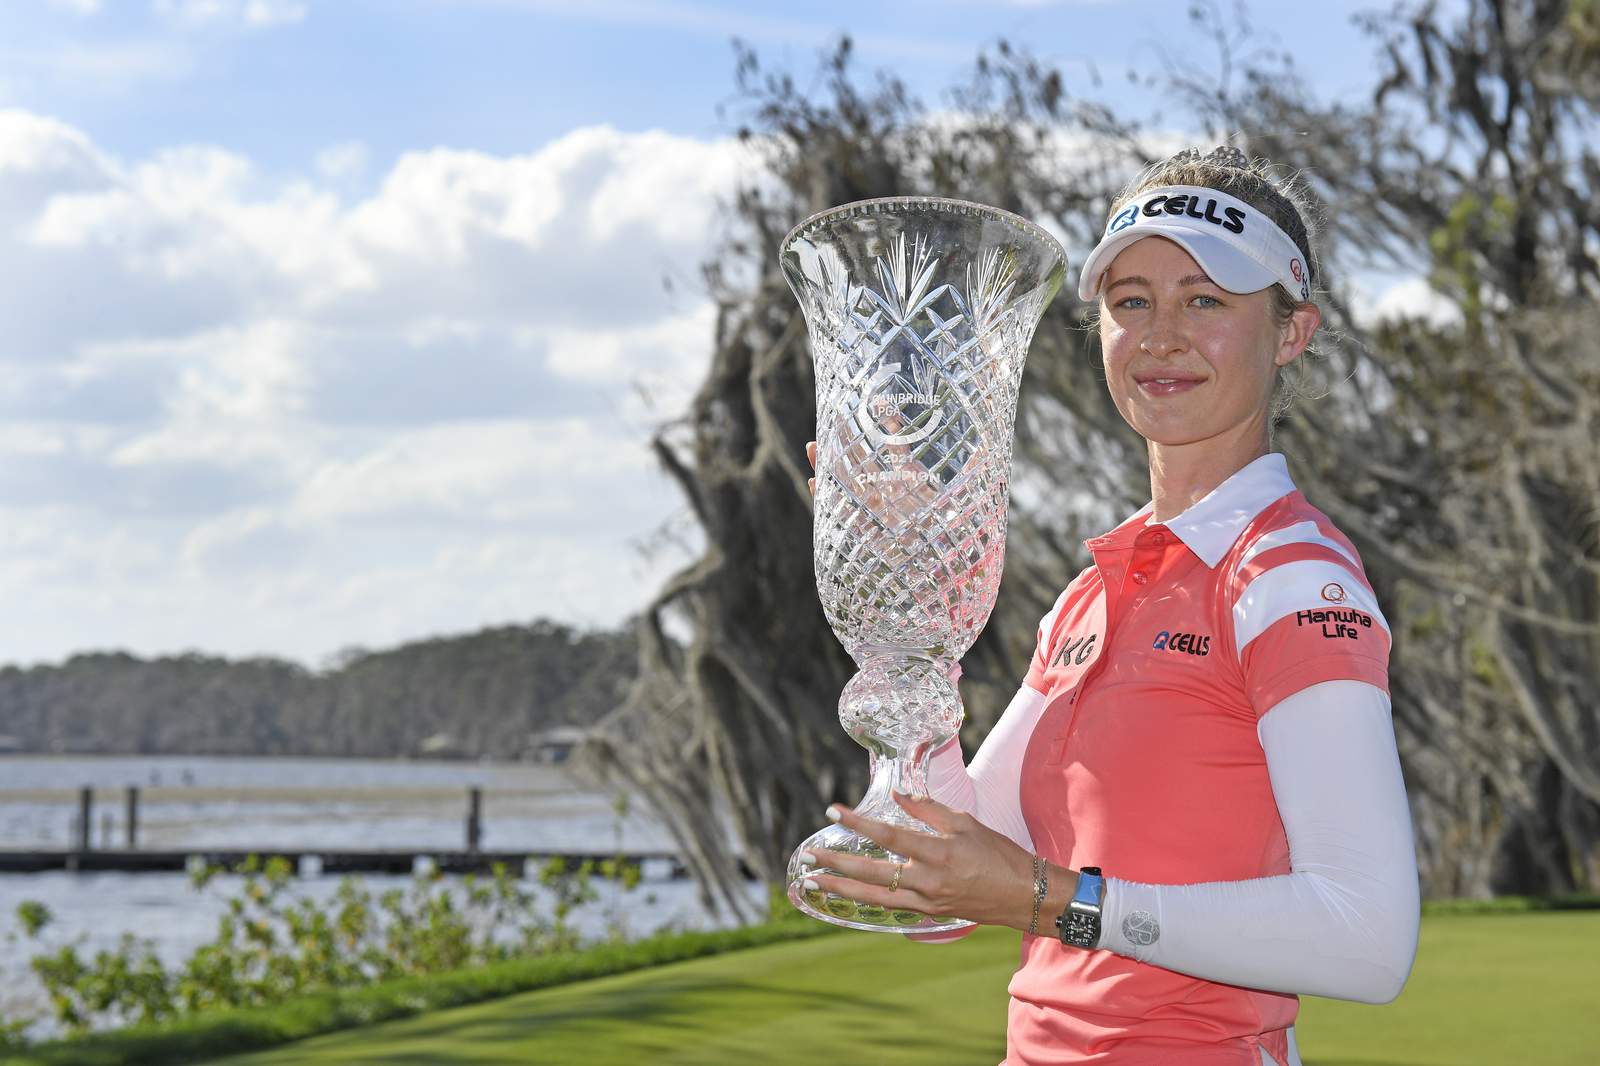 Whoa, Nelly! Korda makes it 2 straight wins for her family